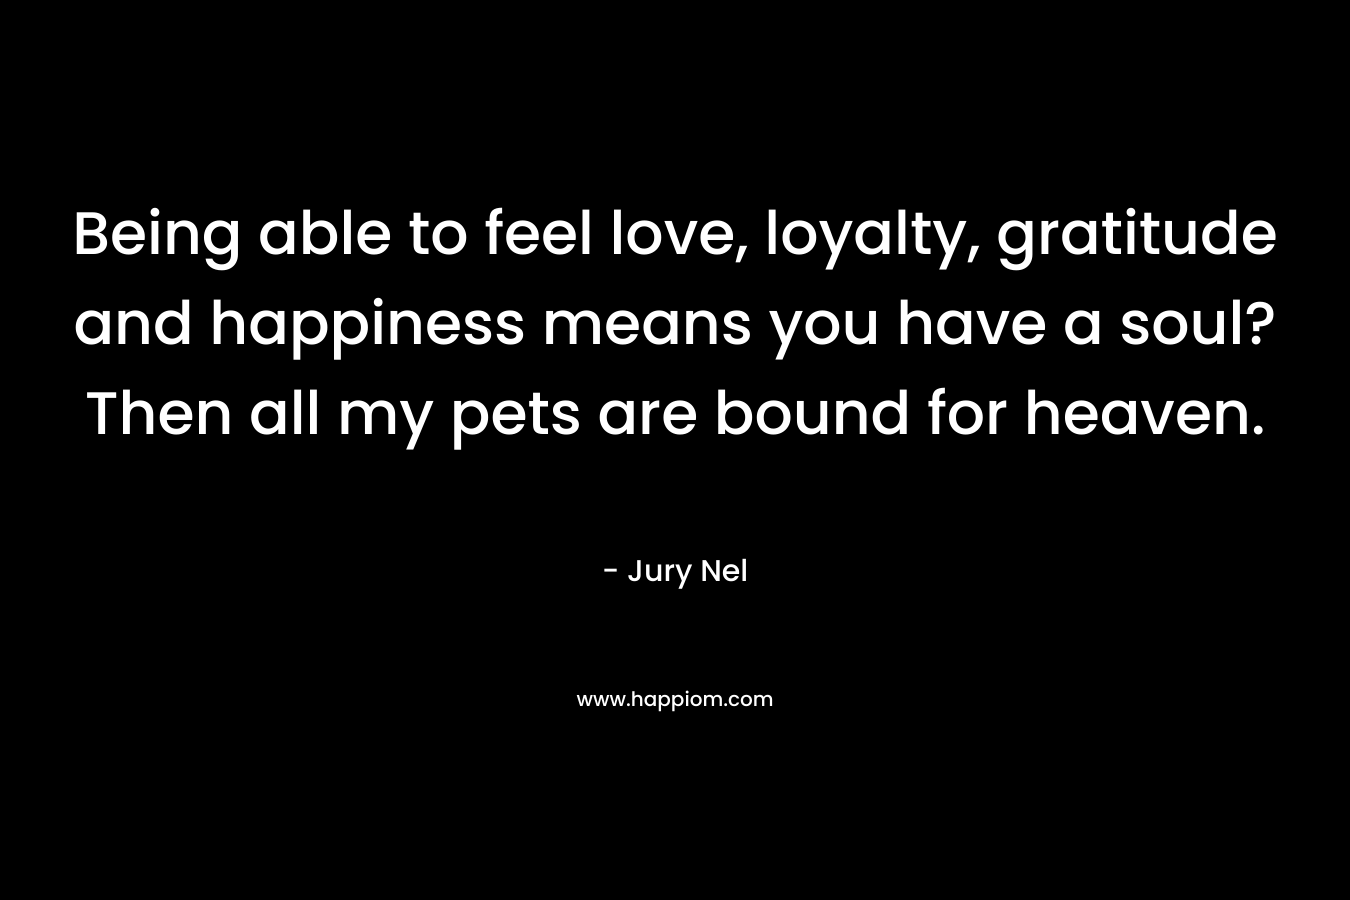 Being able to feel love, loyalty, gratitude and happiness means you have a soul? Then all my pets are bound for heaven. – Jury Nel